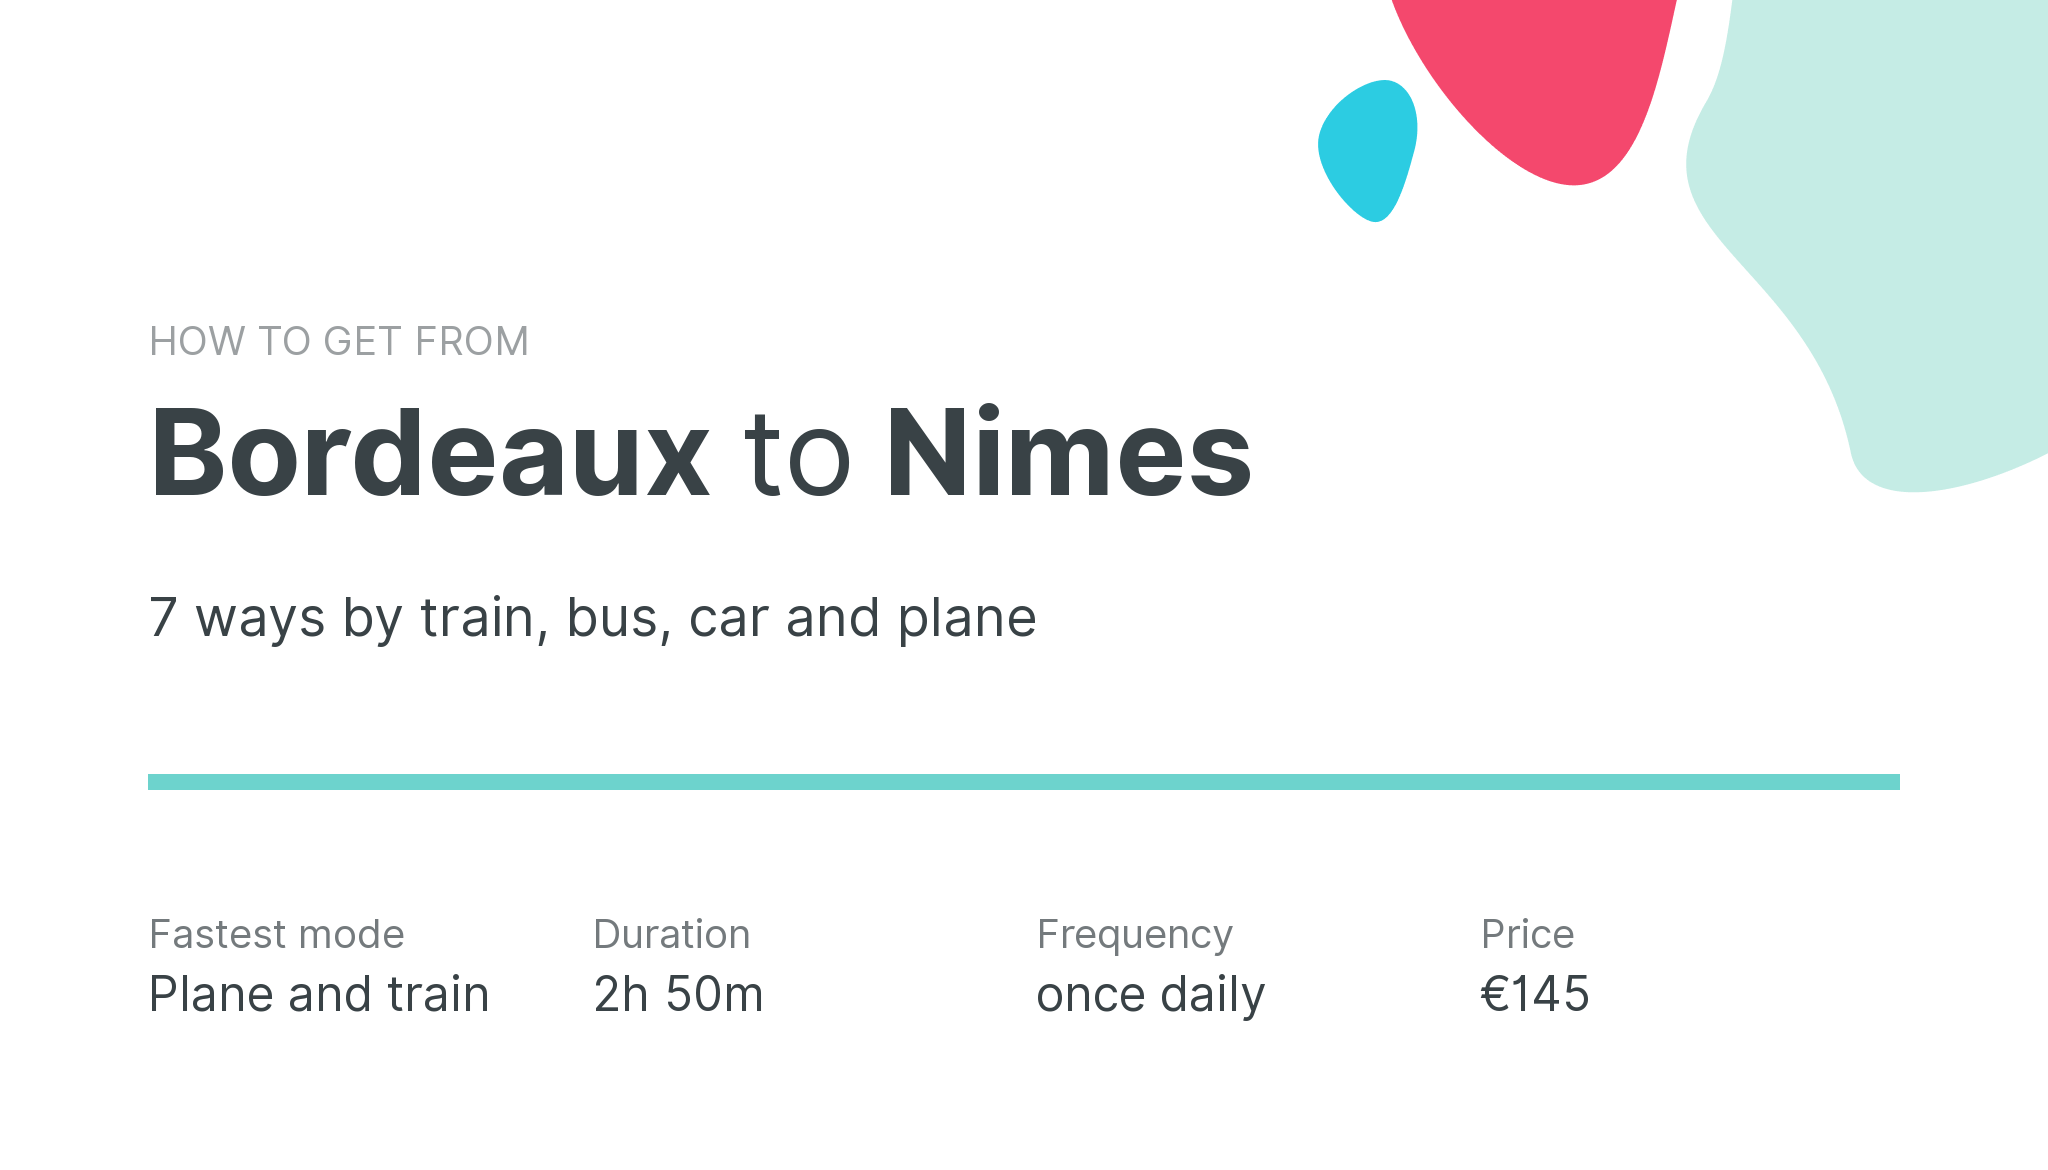 How do I get from Bordeaux to Nimes